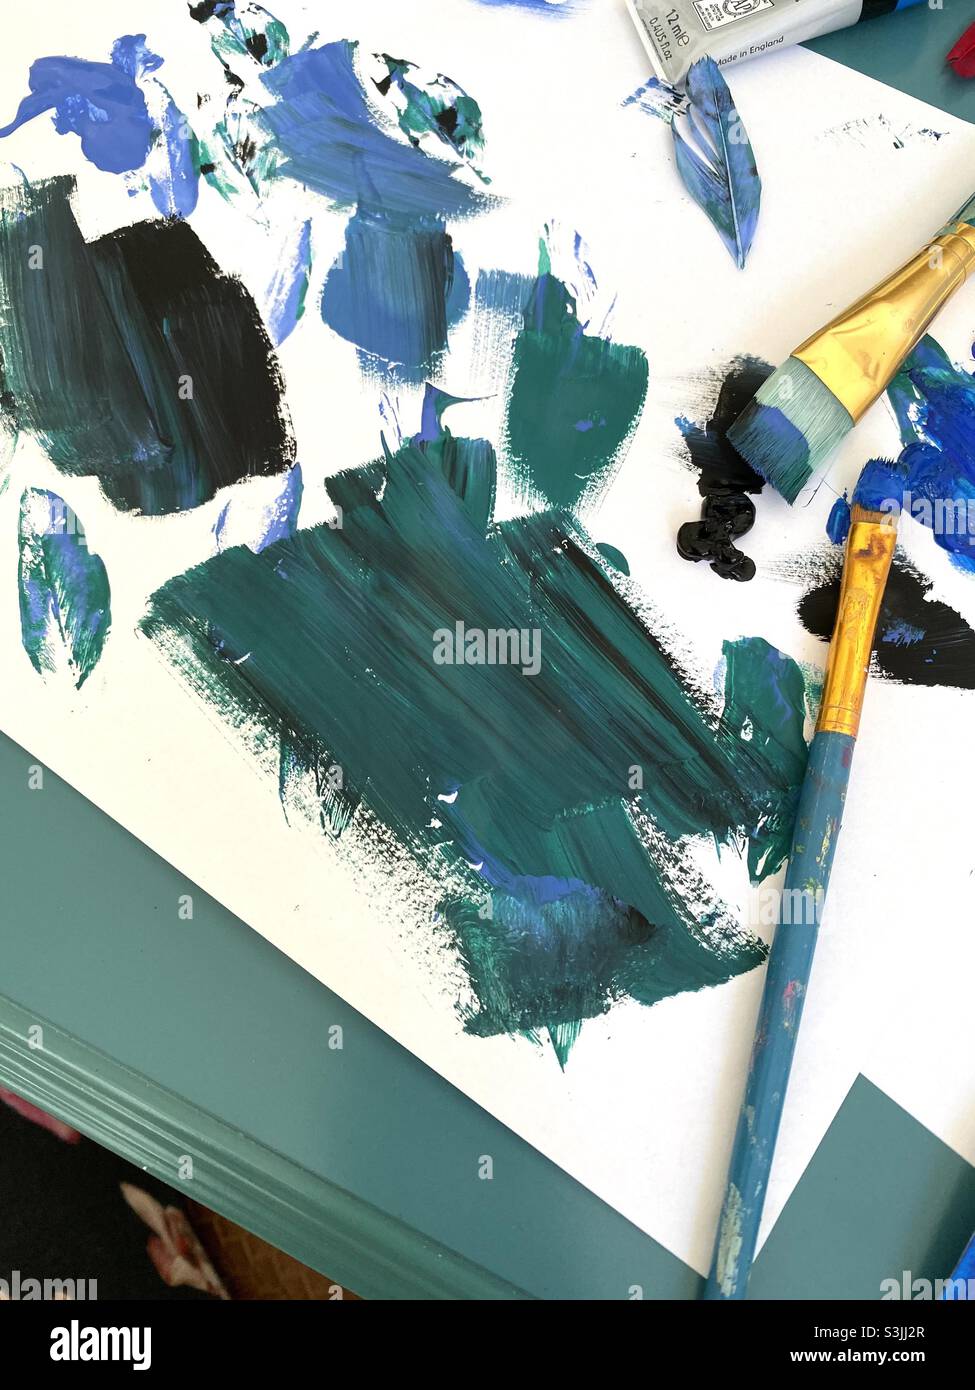 Hues of blue paint with creative artists paint brushes. Stock Photo